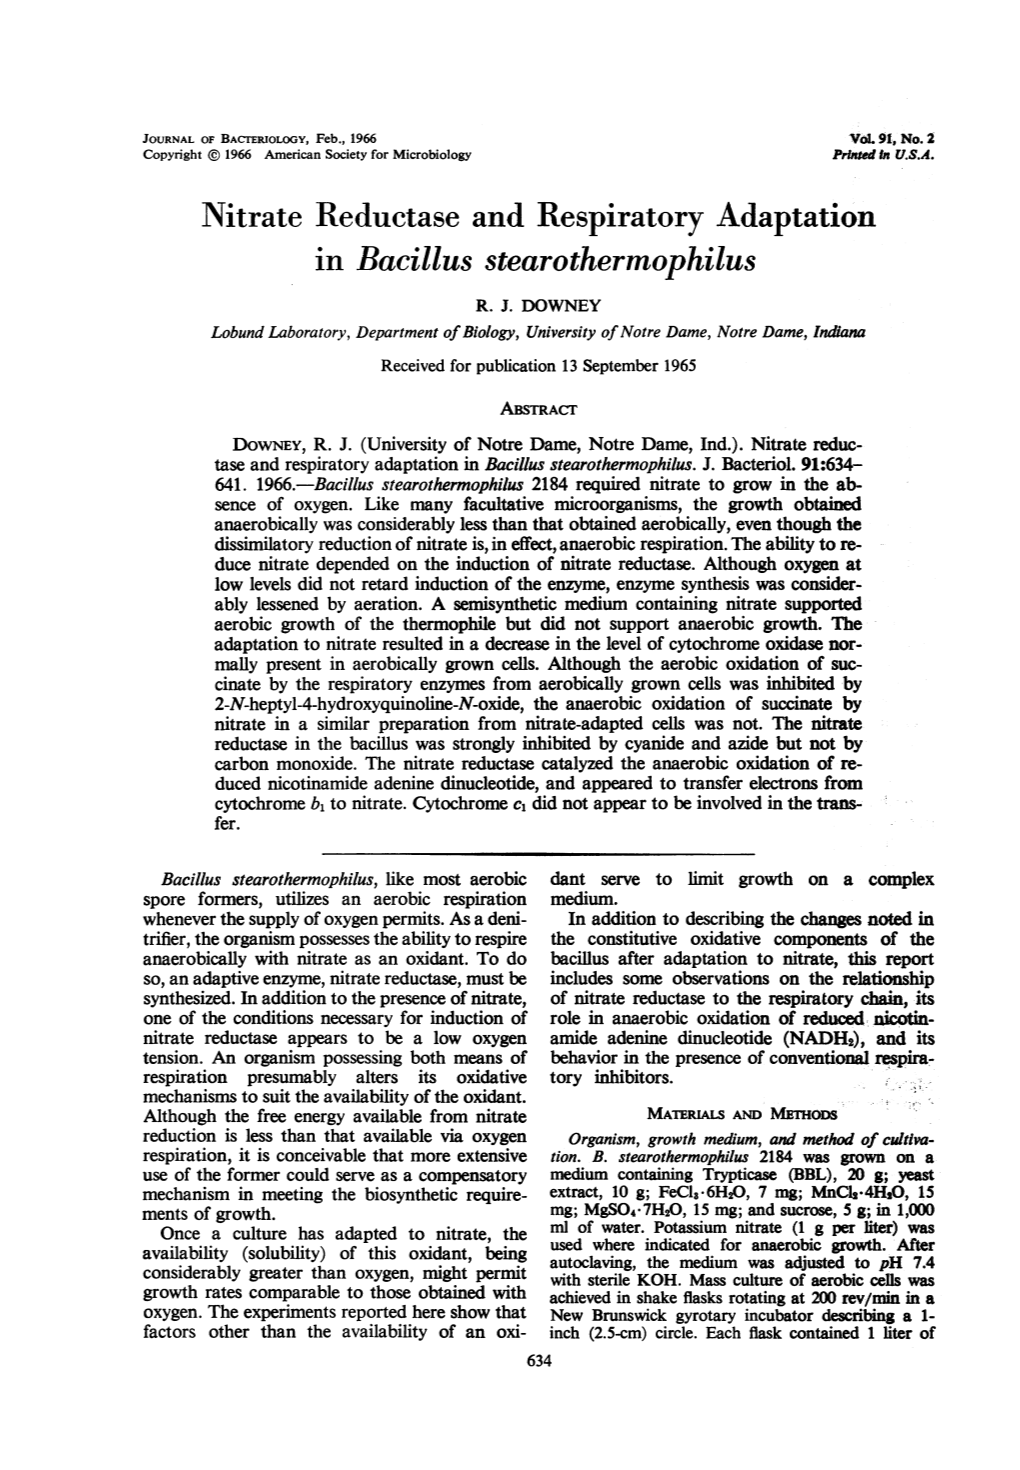 Nitrate Reductase and Respiratory Adaptation in Bacillus Stearothermophilus R